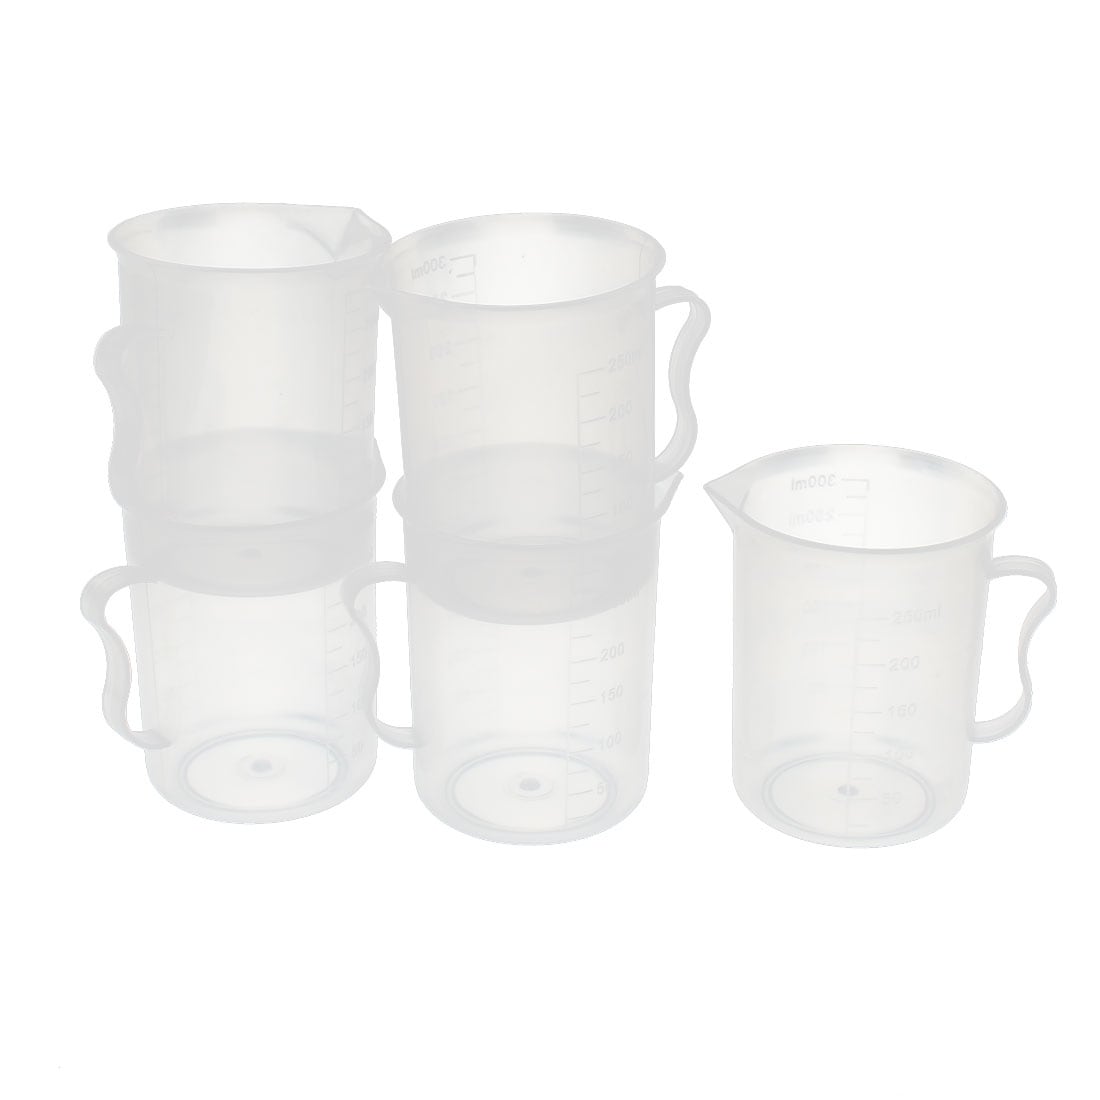 https://ak1.ostkcdn.com/images/products/is/images/direct/51b0c6382ef6881858fa0dc78c2d2fe64f815992/5Pcs-Kitchen-Lab-250ml-Plastic-Measuring-Jug-Cups-Handle-Pour-Spout-Container.jpg